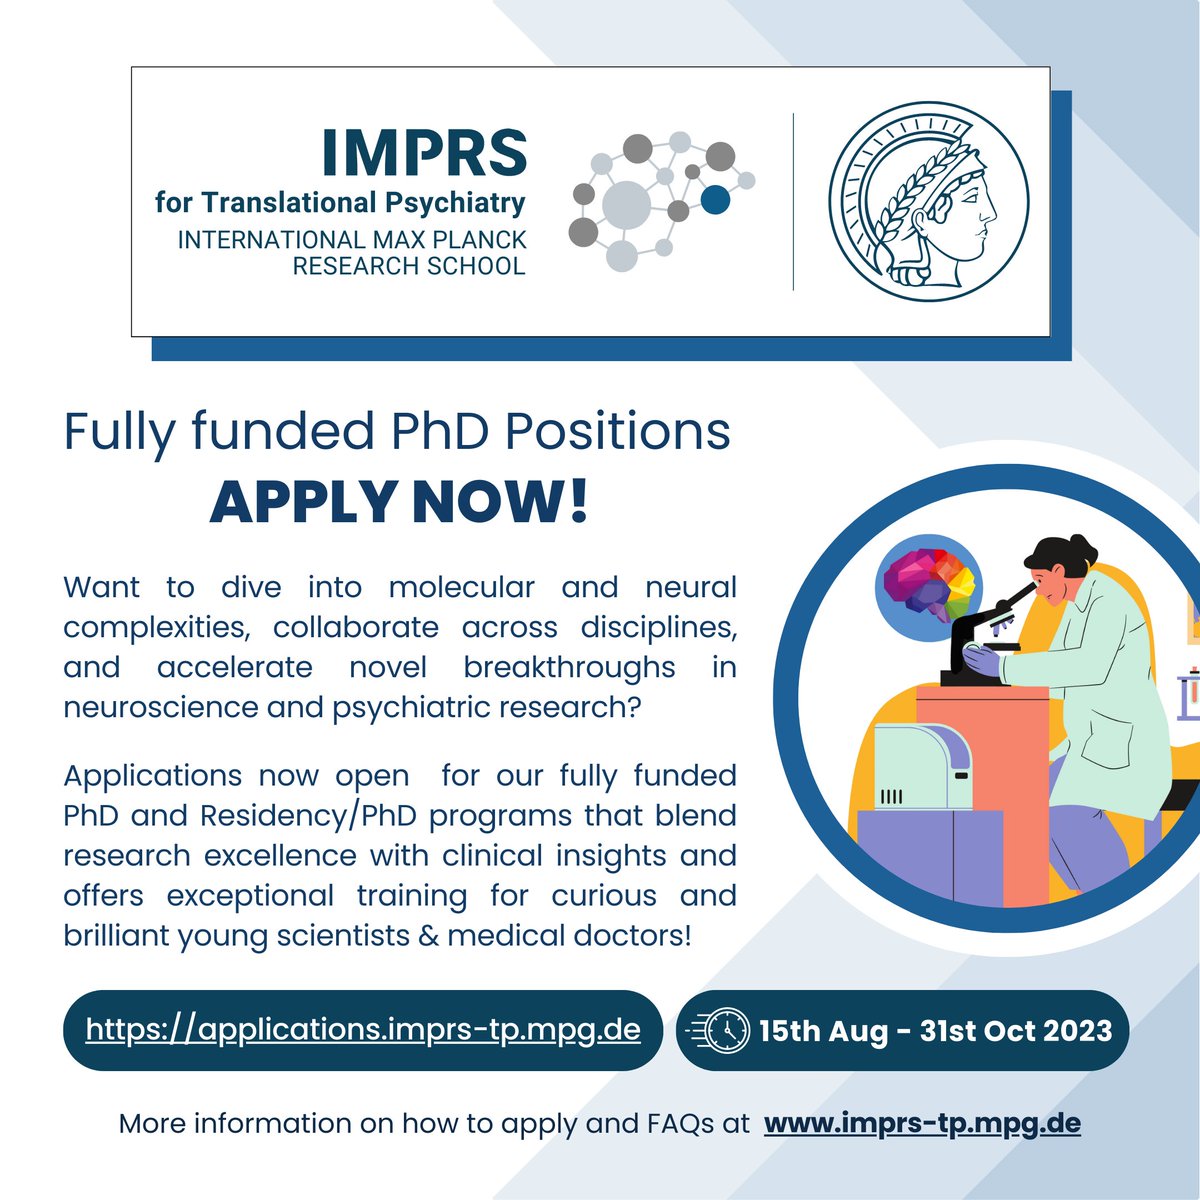 📢 Opportunity Alert!🧠 ⭐️Apply for our fully funded #PhD Positions in #Neuroscience & Translational #Psychiatry in Munich 📝 at applications.imprs-tp.mpg.de ⏰ until 31st Oct, 2023. ❔imprs-tp.mpg.de/3041/instructi… ❔imprs-tp.mpg.de/97967/FAQs #PhDposition #hiring #research @mpi_psychiatry